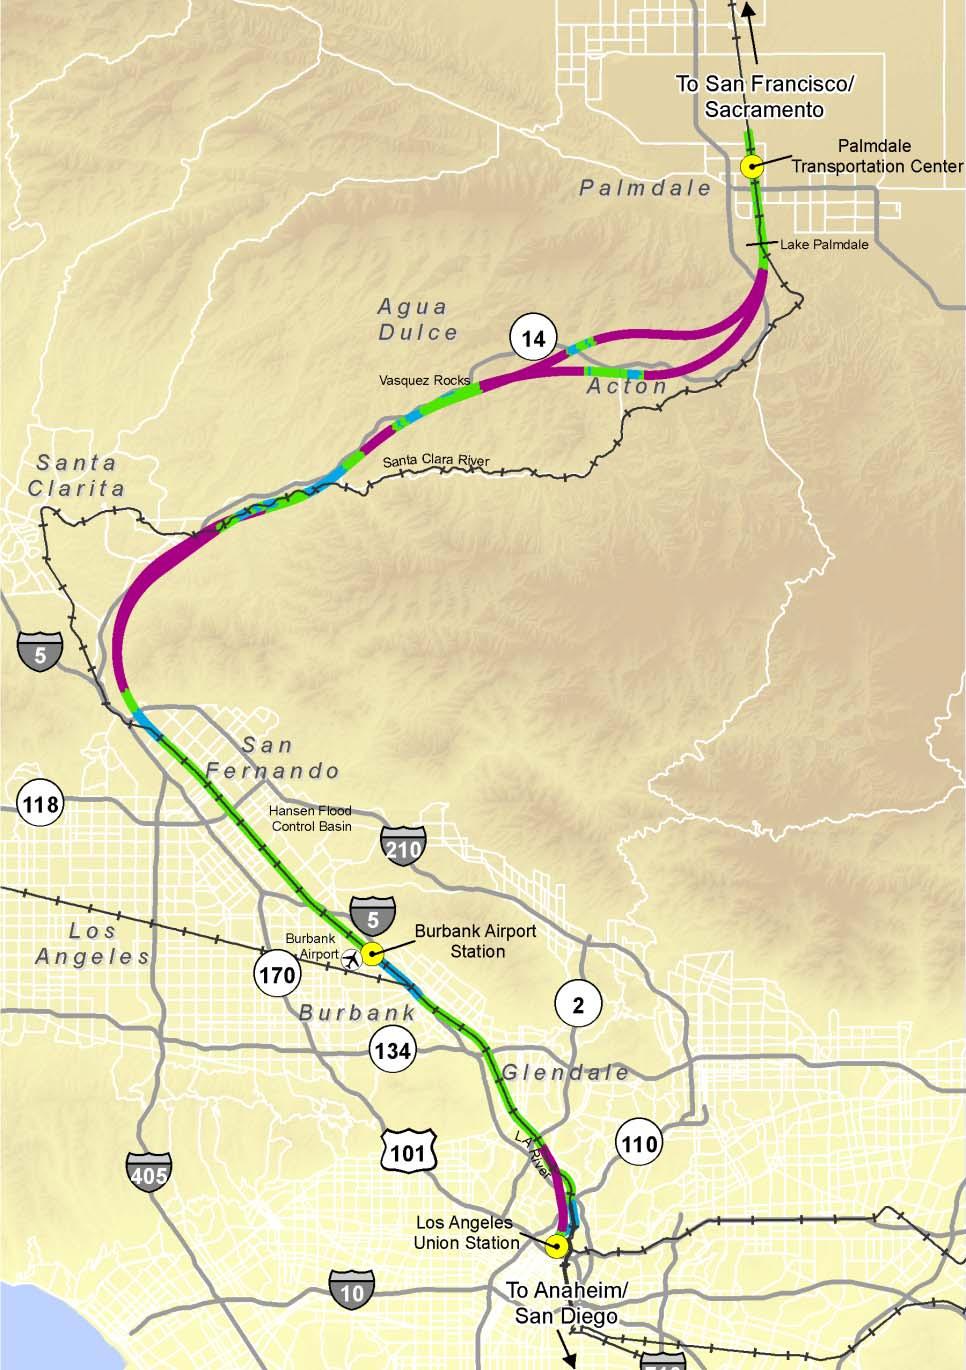 PALMDALE TO LOS ANGELES PROJECT SECTION 60 Mile Route Connects the Antelope Valley to Downtown Los Angeles Includes the Initial Operating